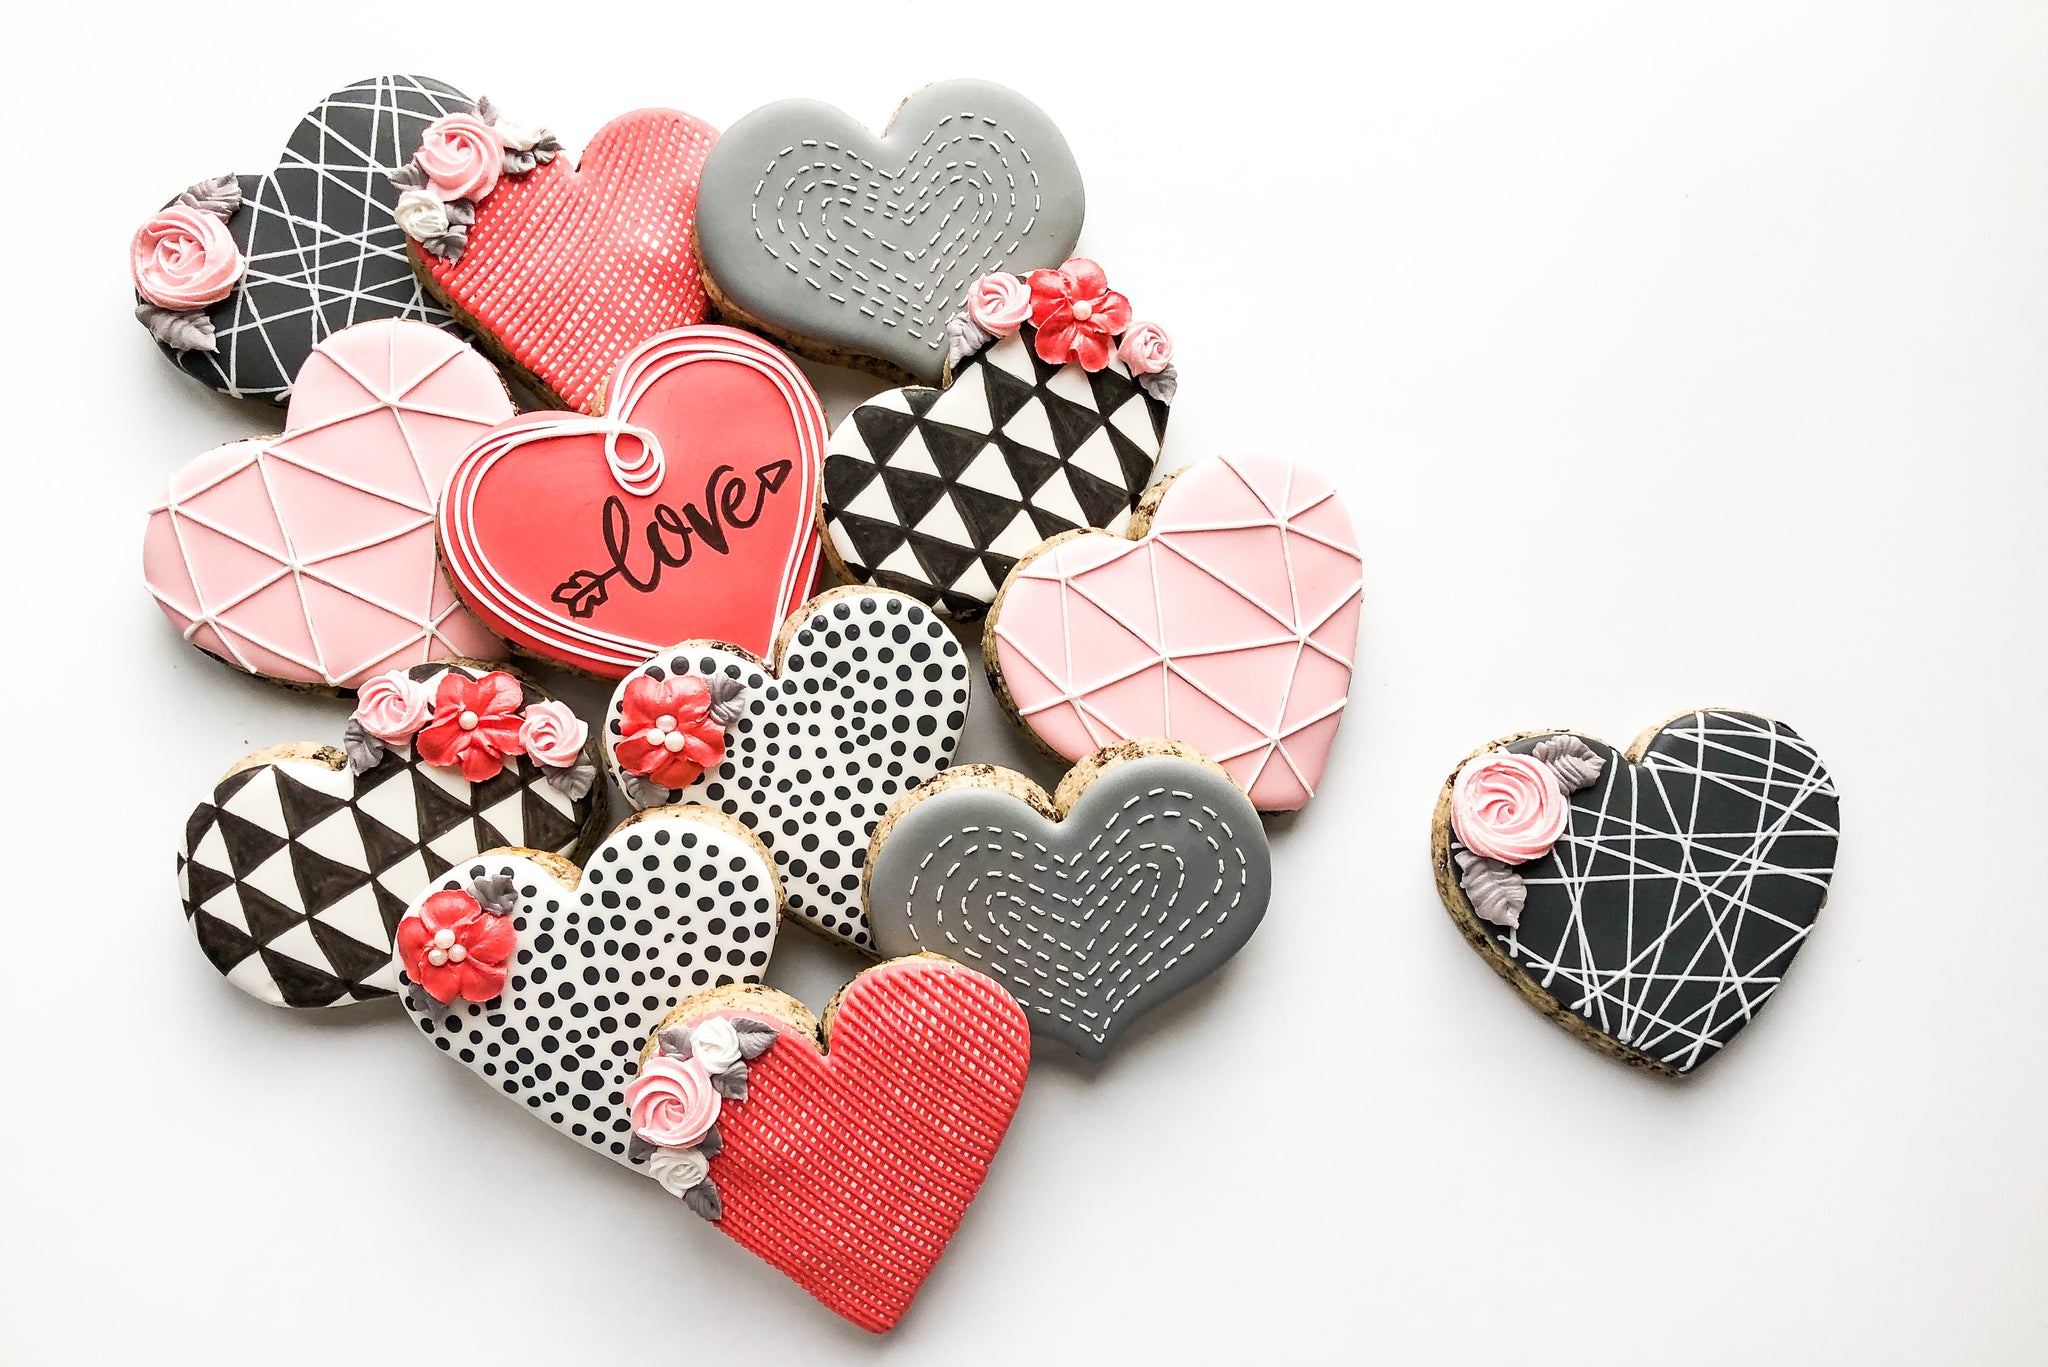 How to make Valentine’s Day cookies